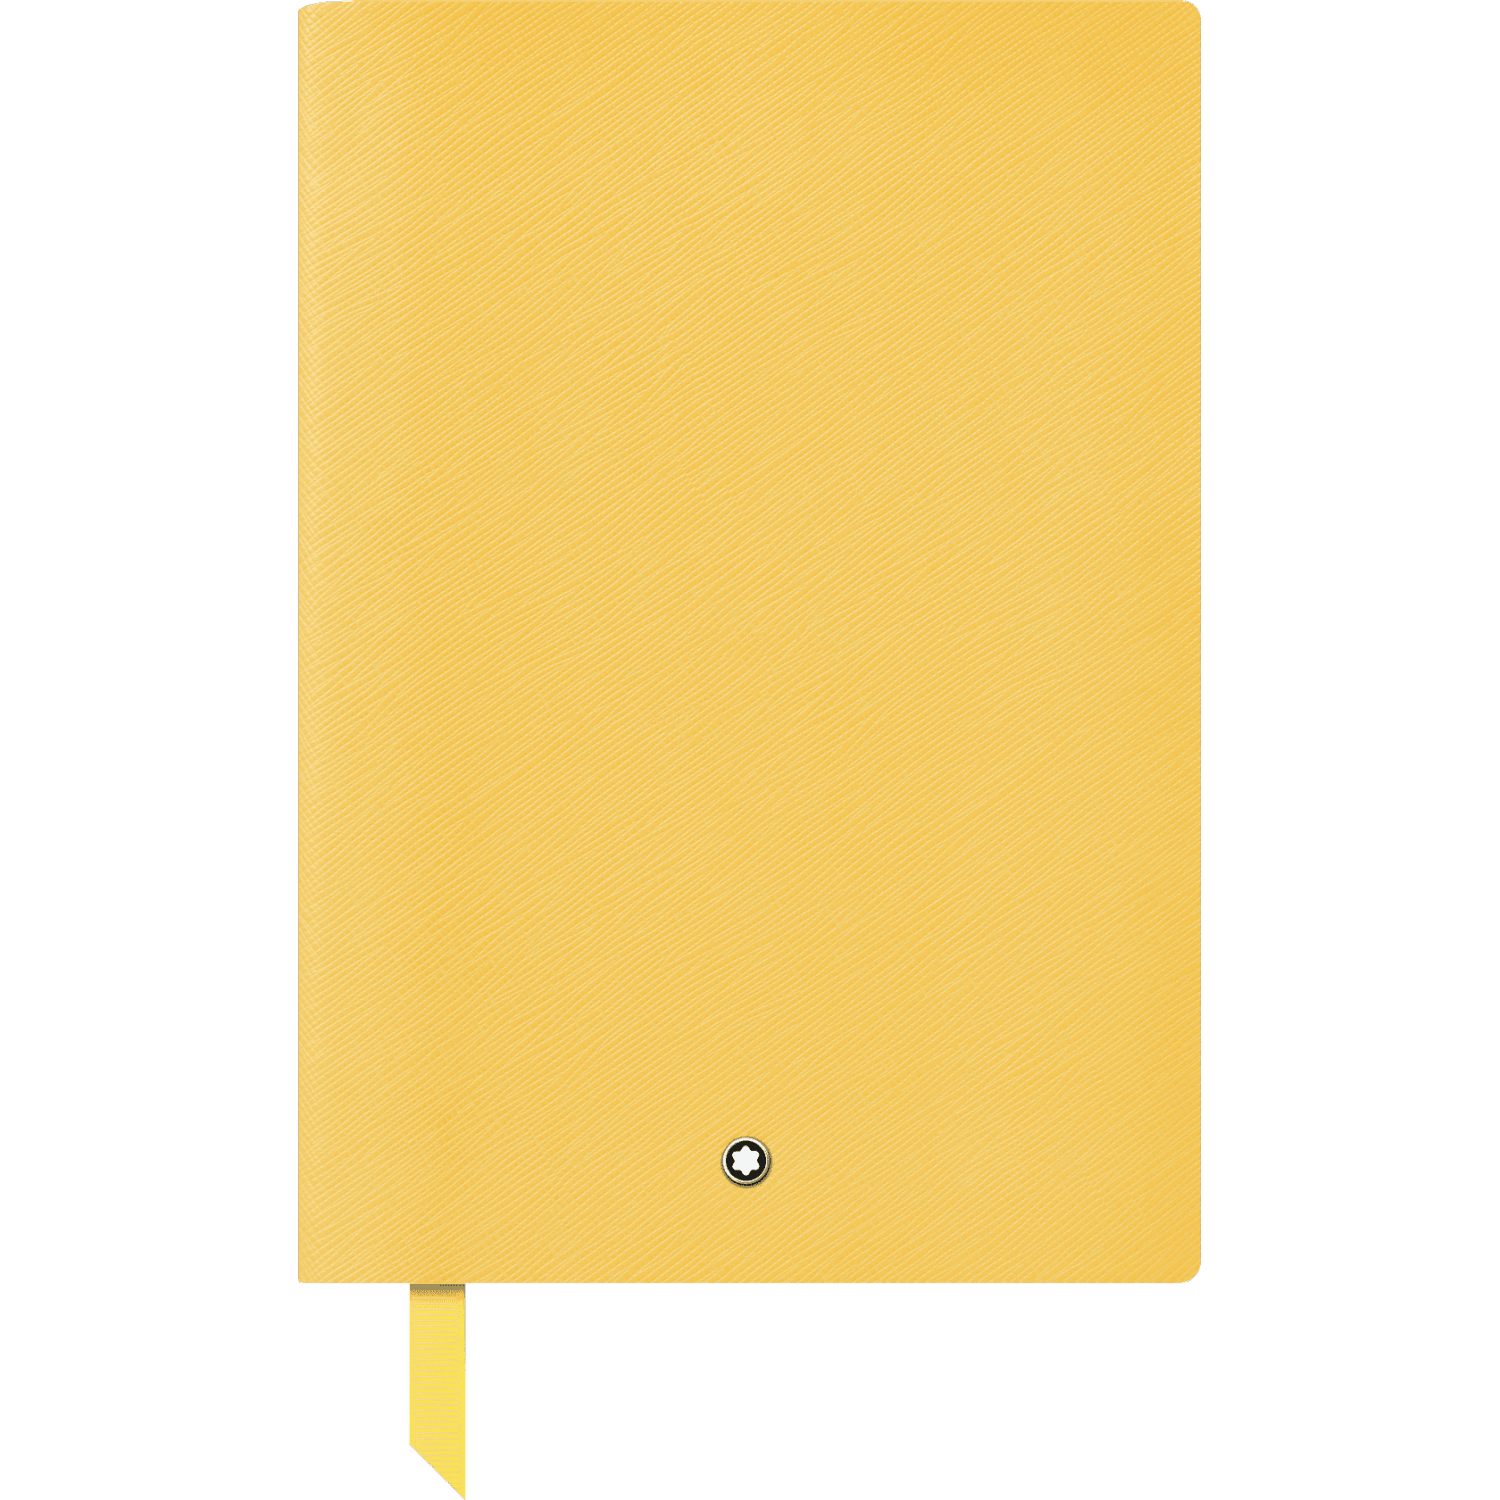 Montblanc Notebook - #146 Mustard Yellow - Lined-Pen Boutique Ltd